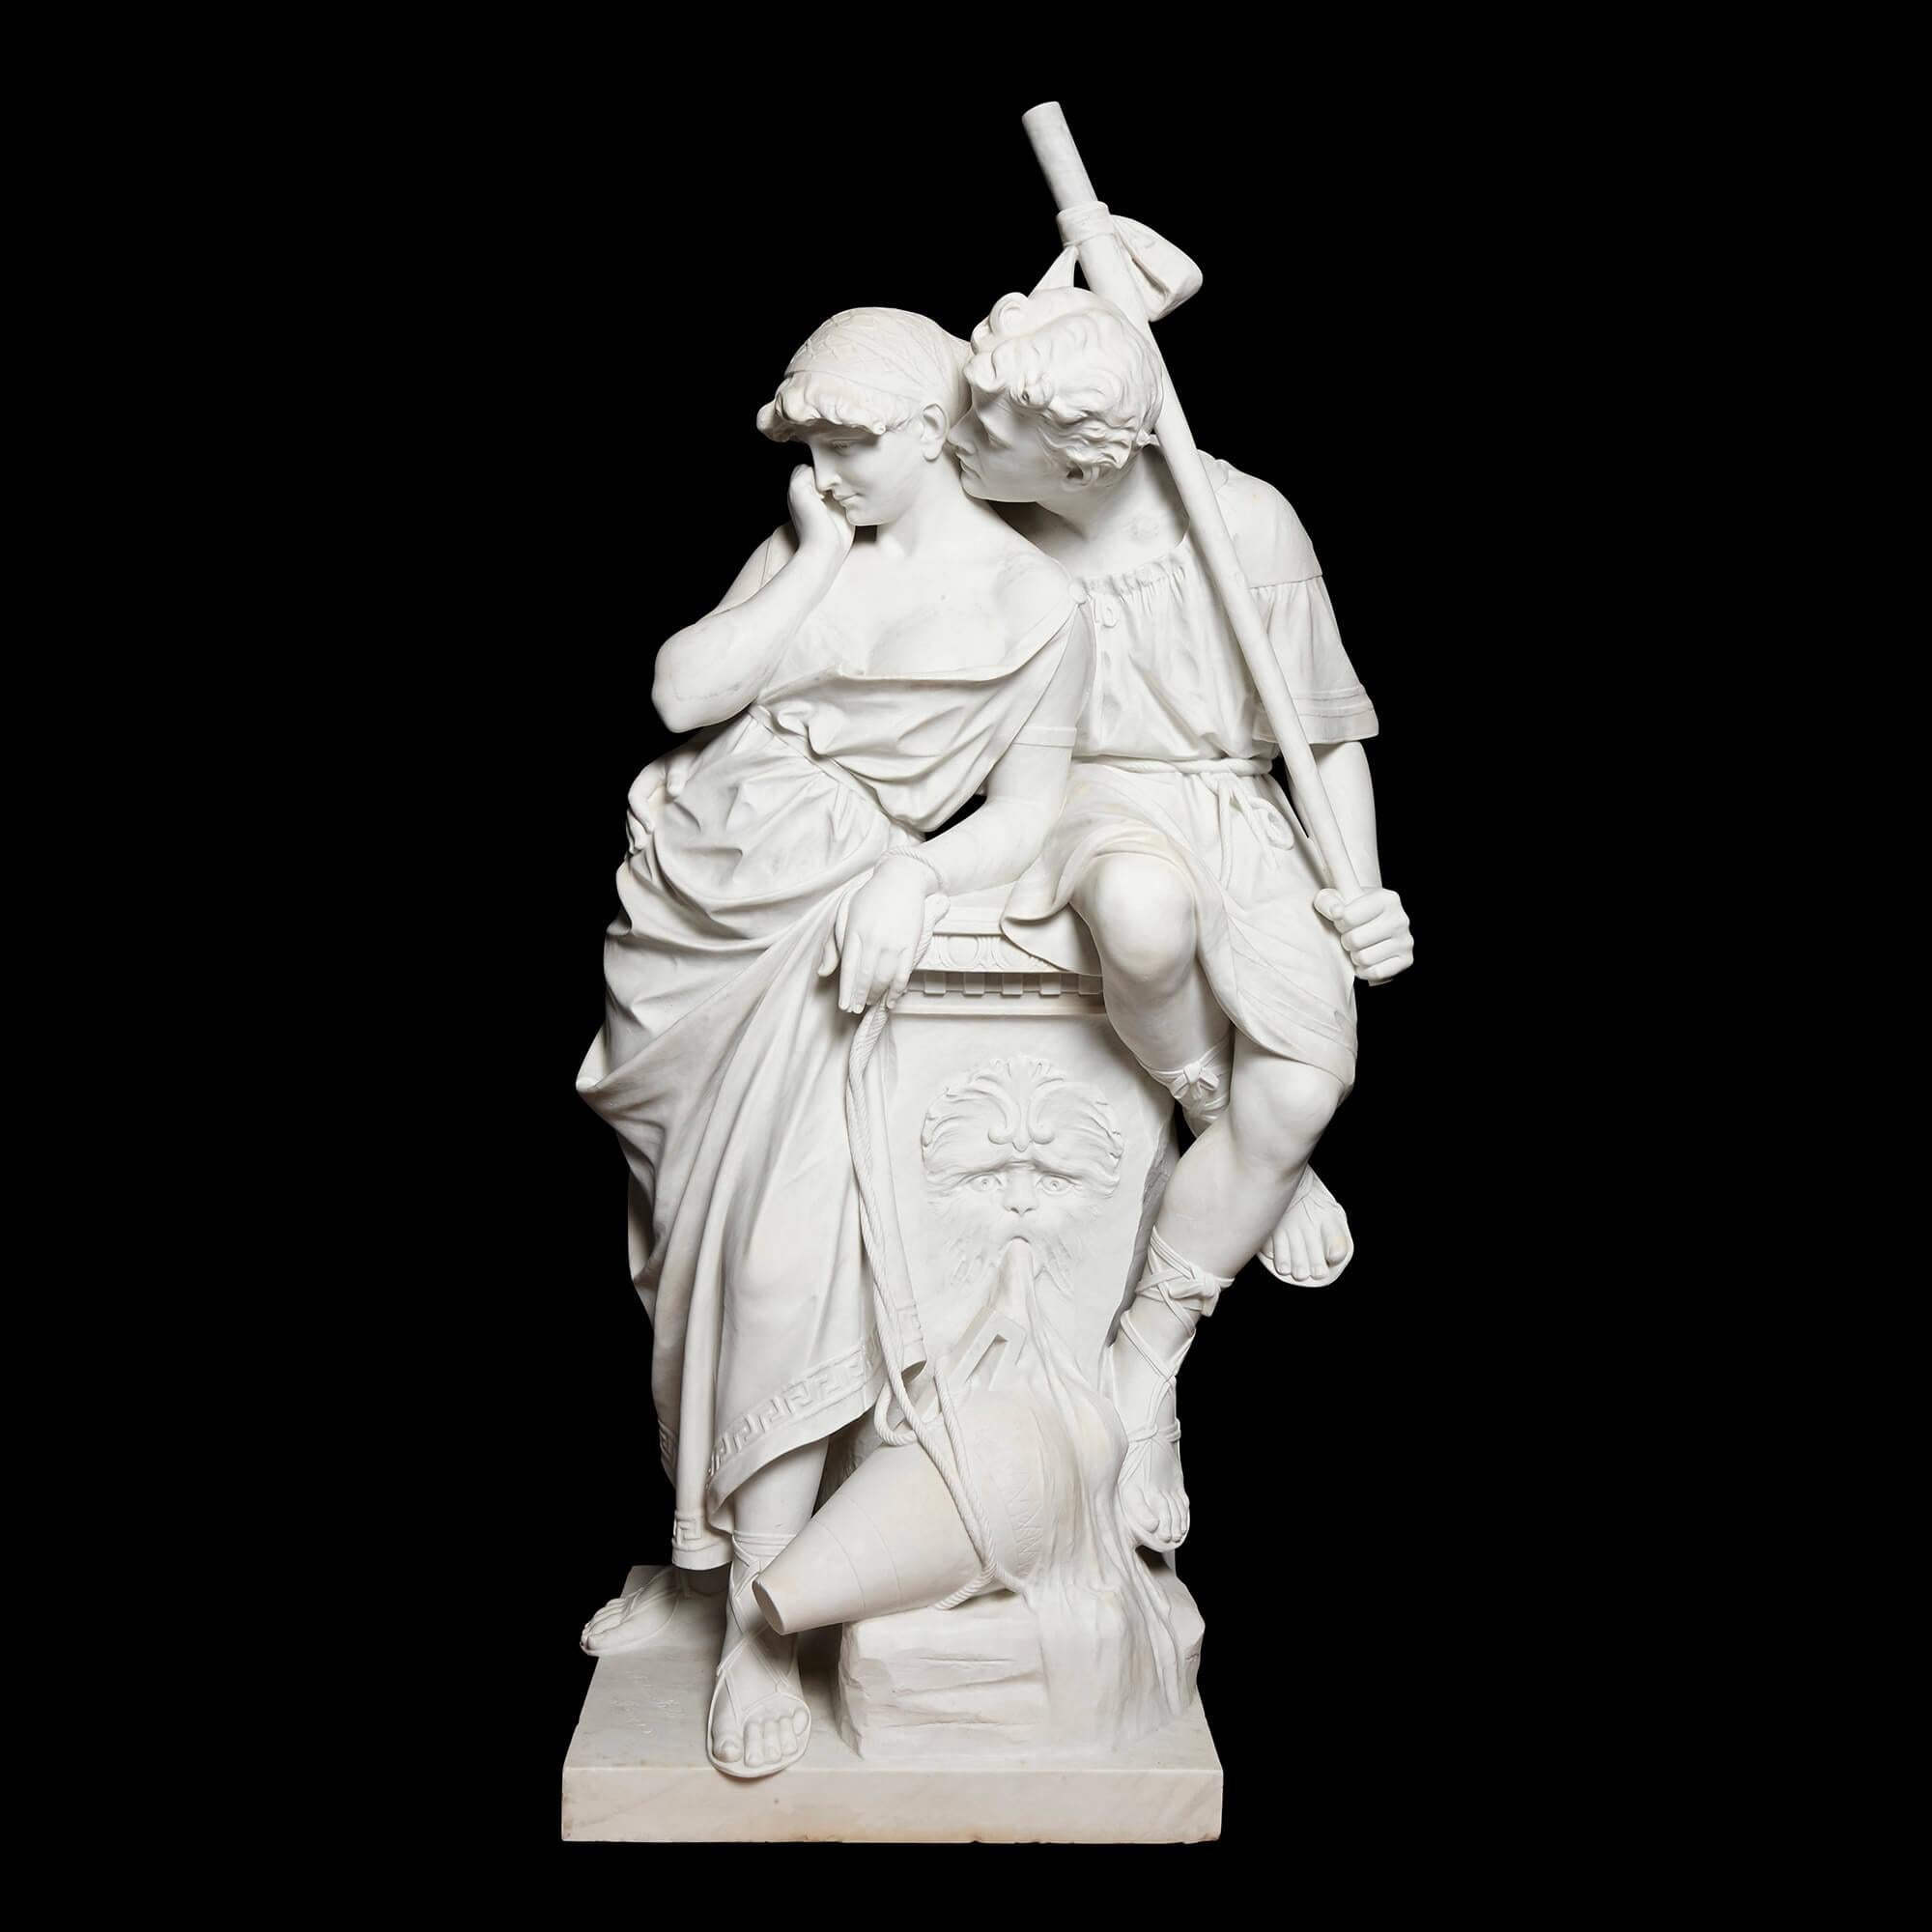 Large marble sculpture of an amorous couple by Antonio Frilli
Italian, late 19th century
Measures: Height 130cm, width 68cm, depth 46cm

This spectacular sculptural group is by Antonio Frilli, one of the most celebrated Florentine sculptors of